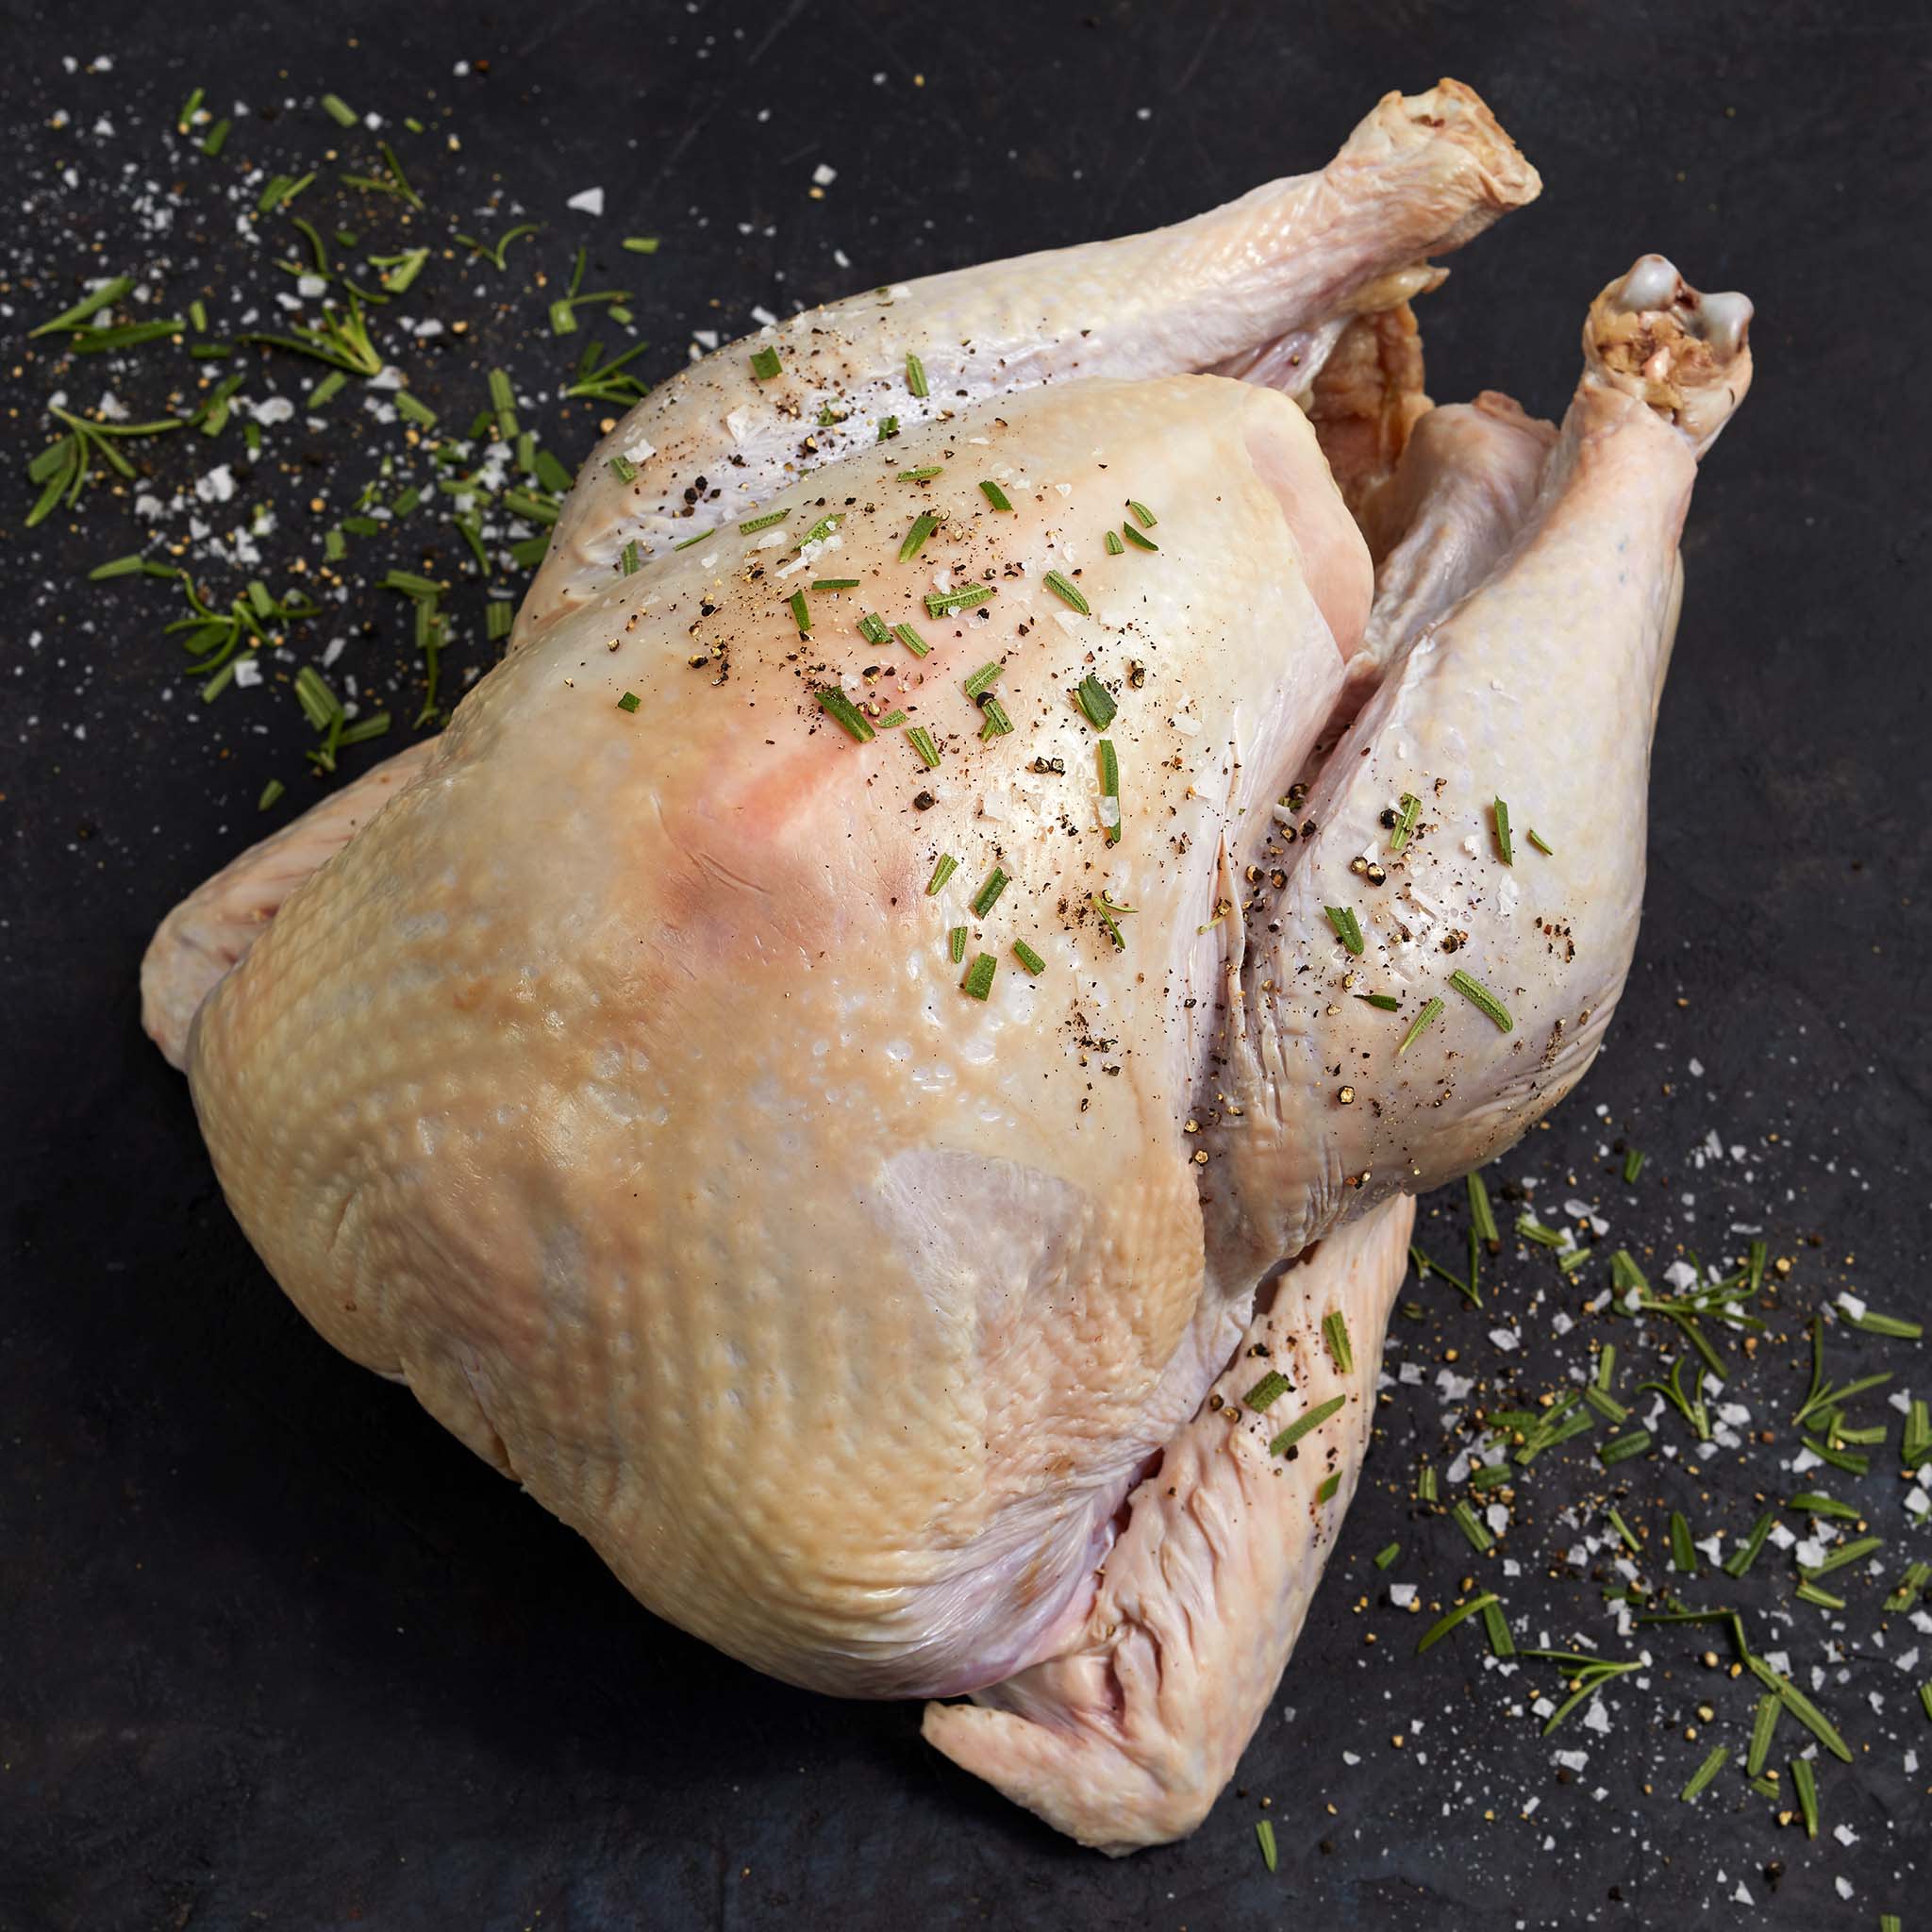 4476 RAW Whole Young Turkey 20-25LBS - Plainville